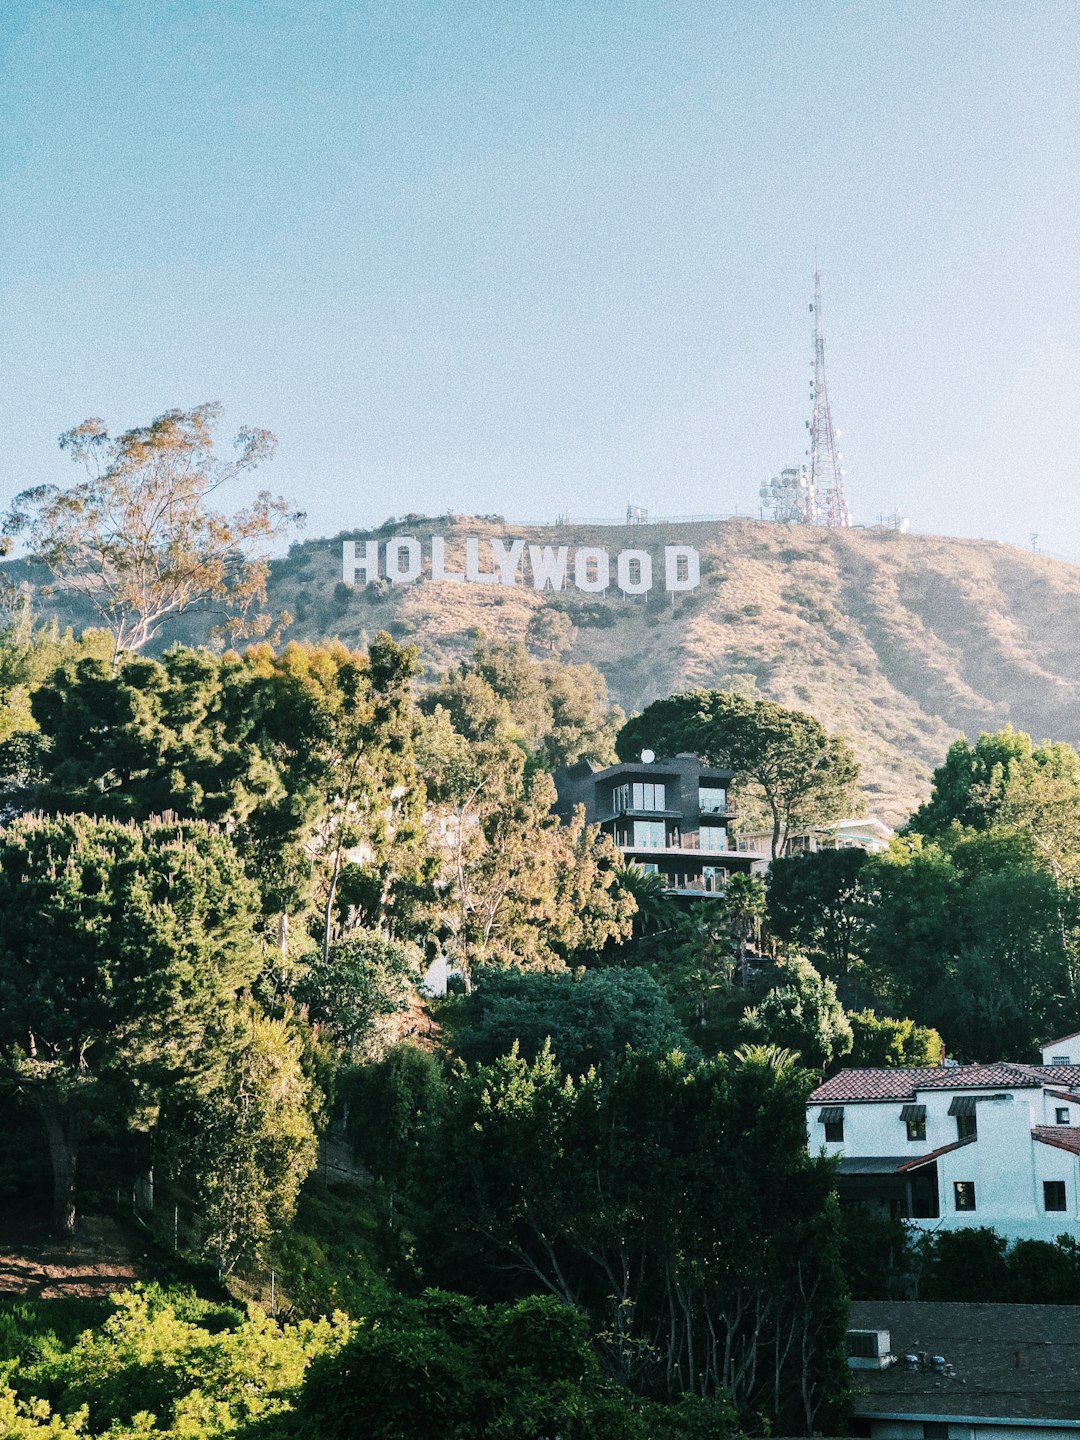 Travel Tips and Stories of Hollywood in United States